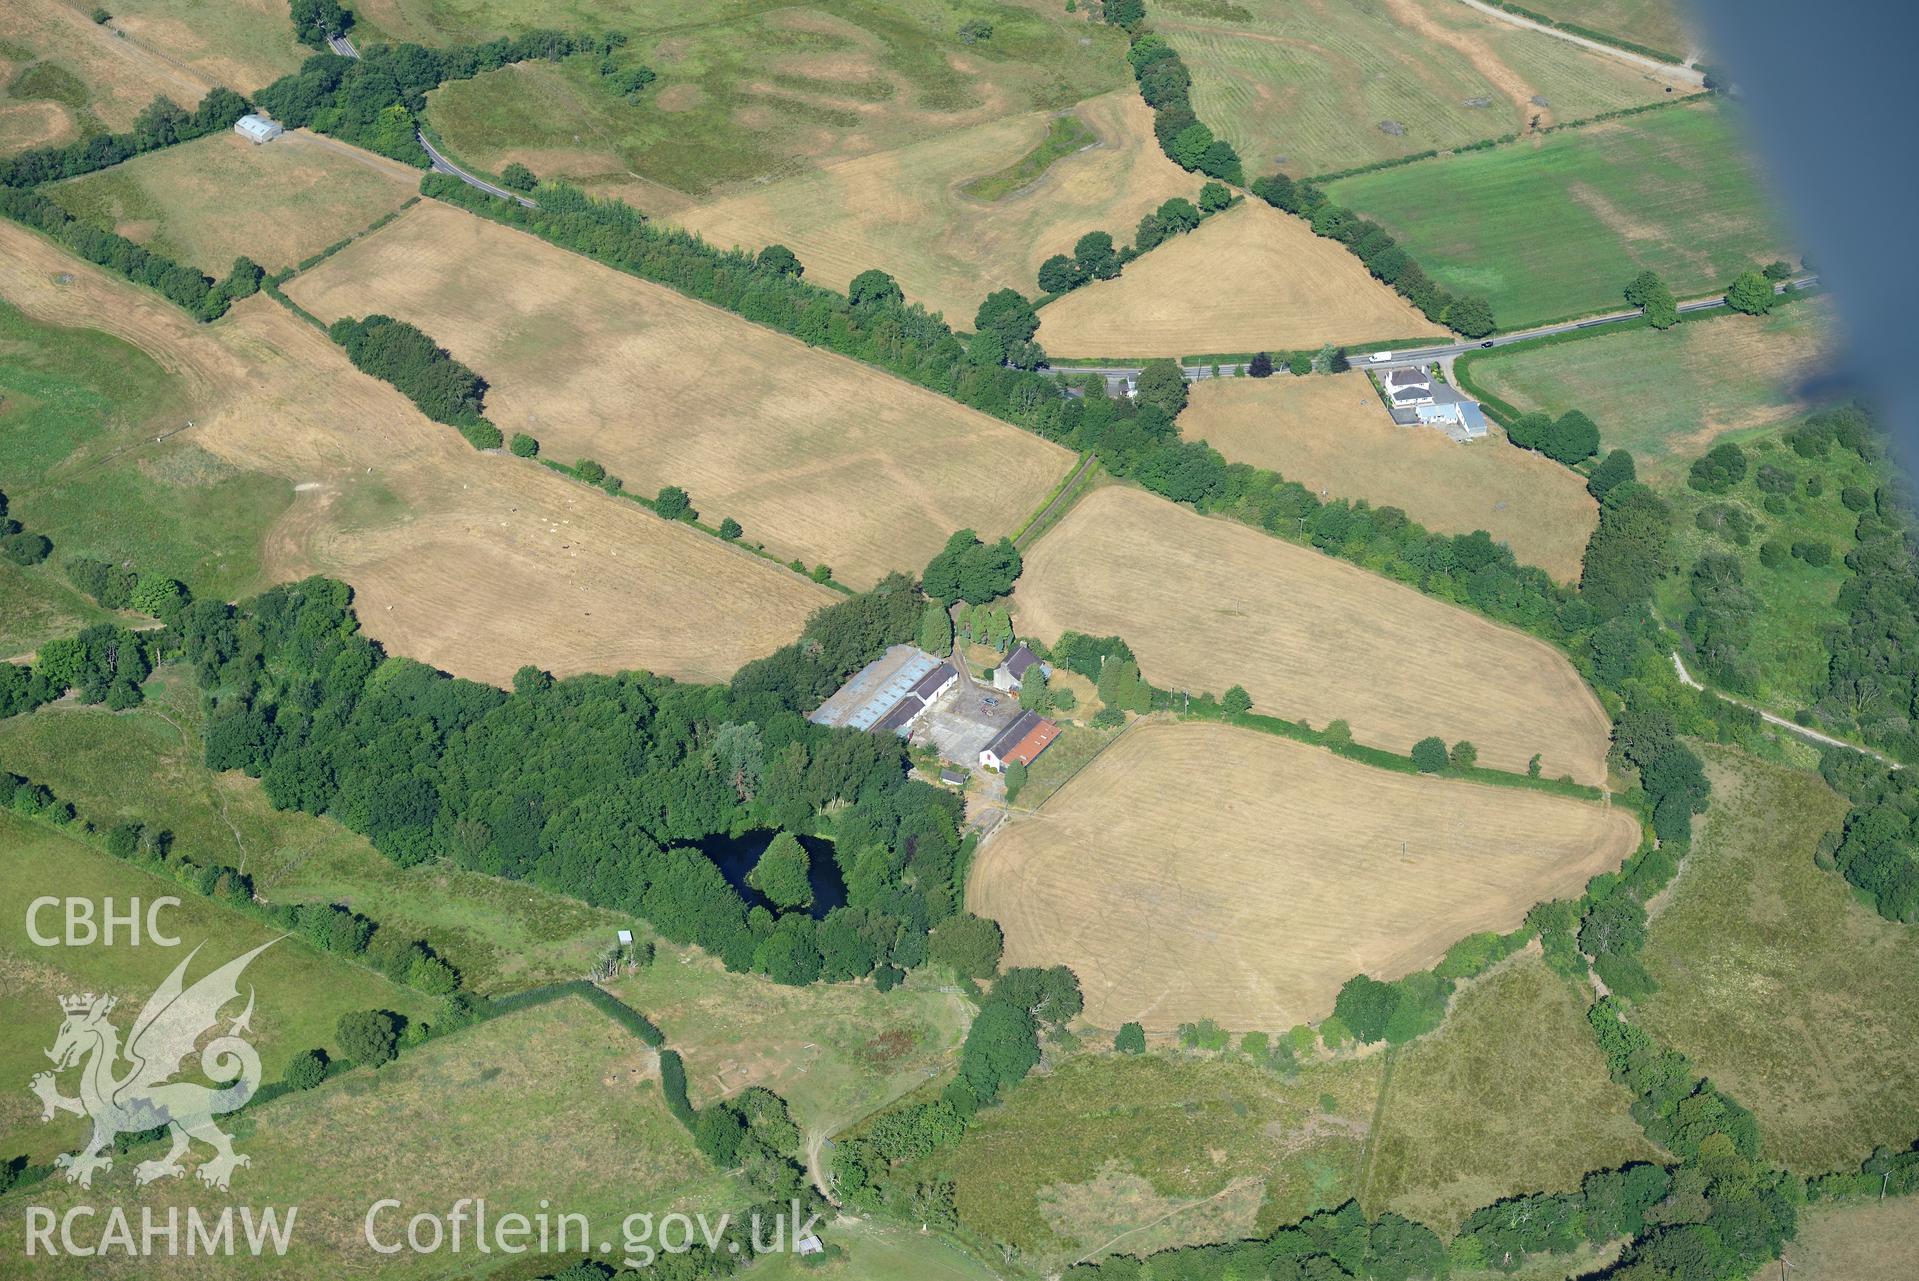 Royal Commission aerial photography of Llanio Roman fort and environs taken on 19th July 2018 during the 2018 drought.